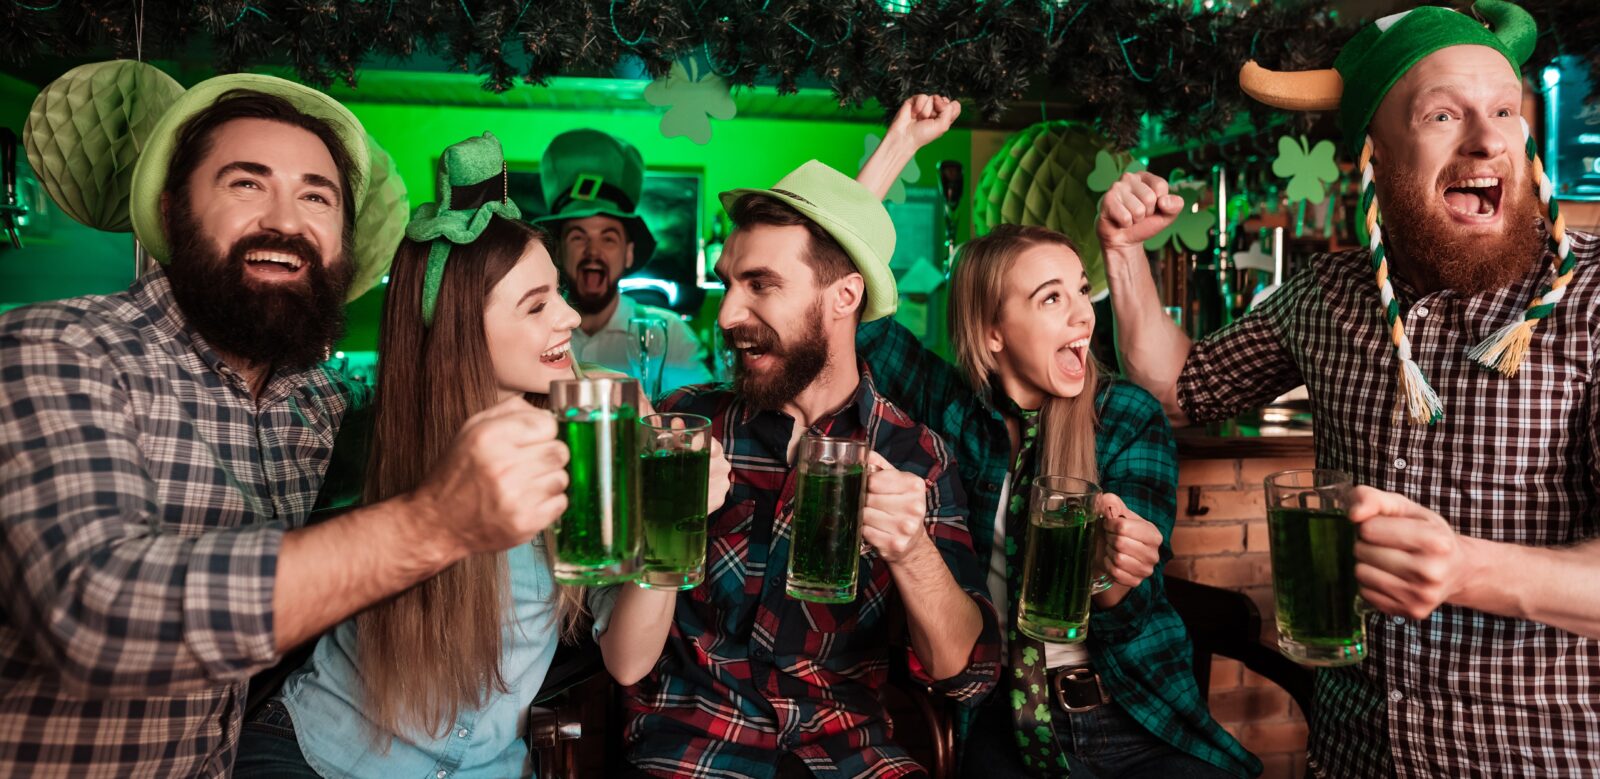 Do The Almost St. Patty’s Day Pub Crawl in Hanford!